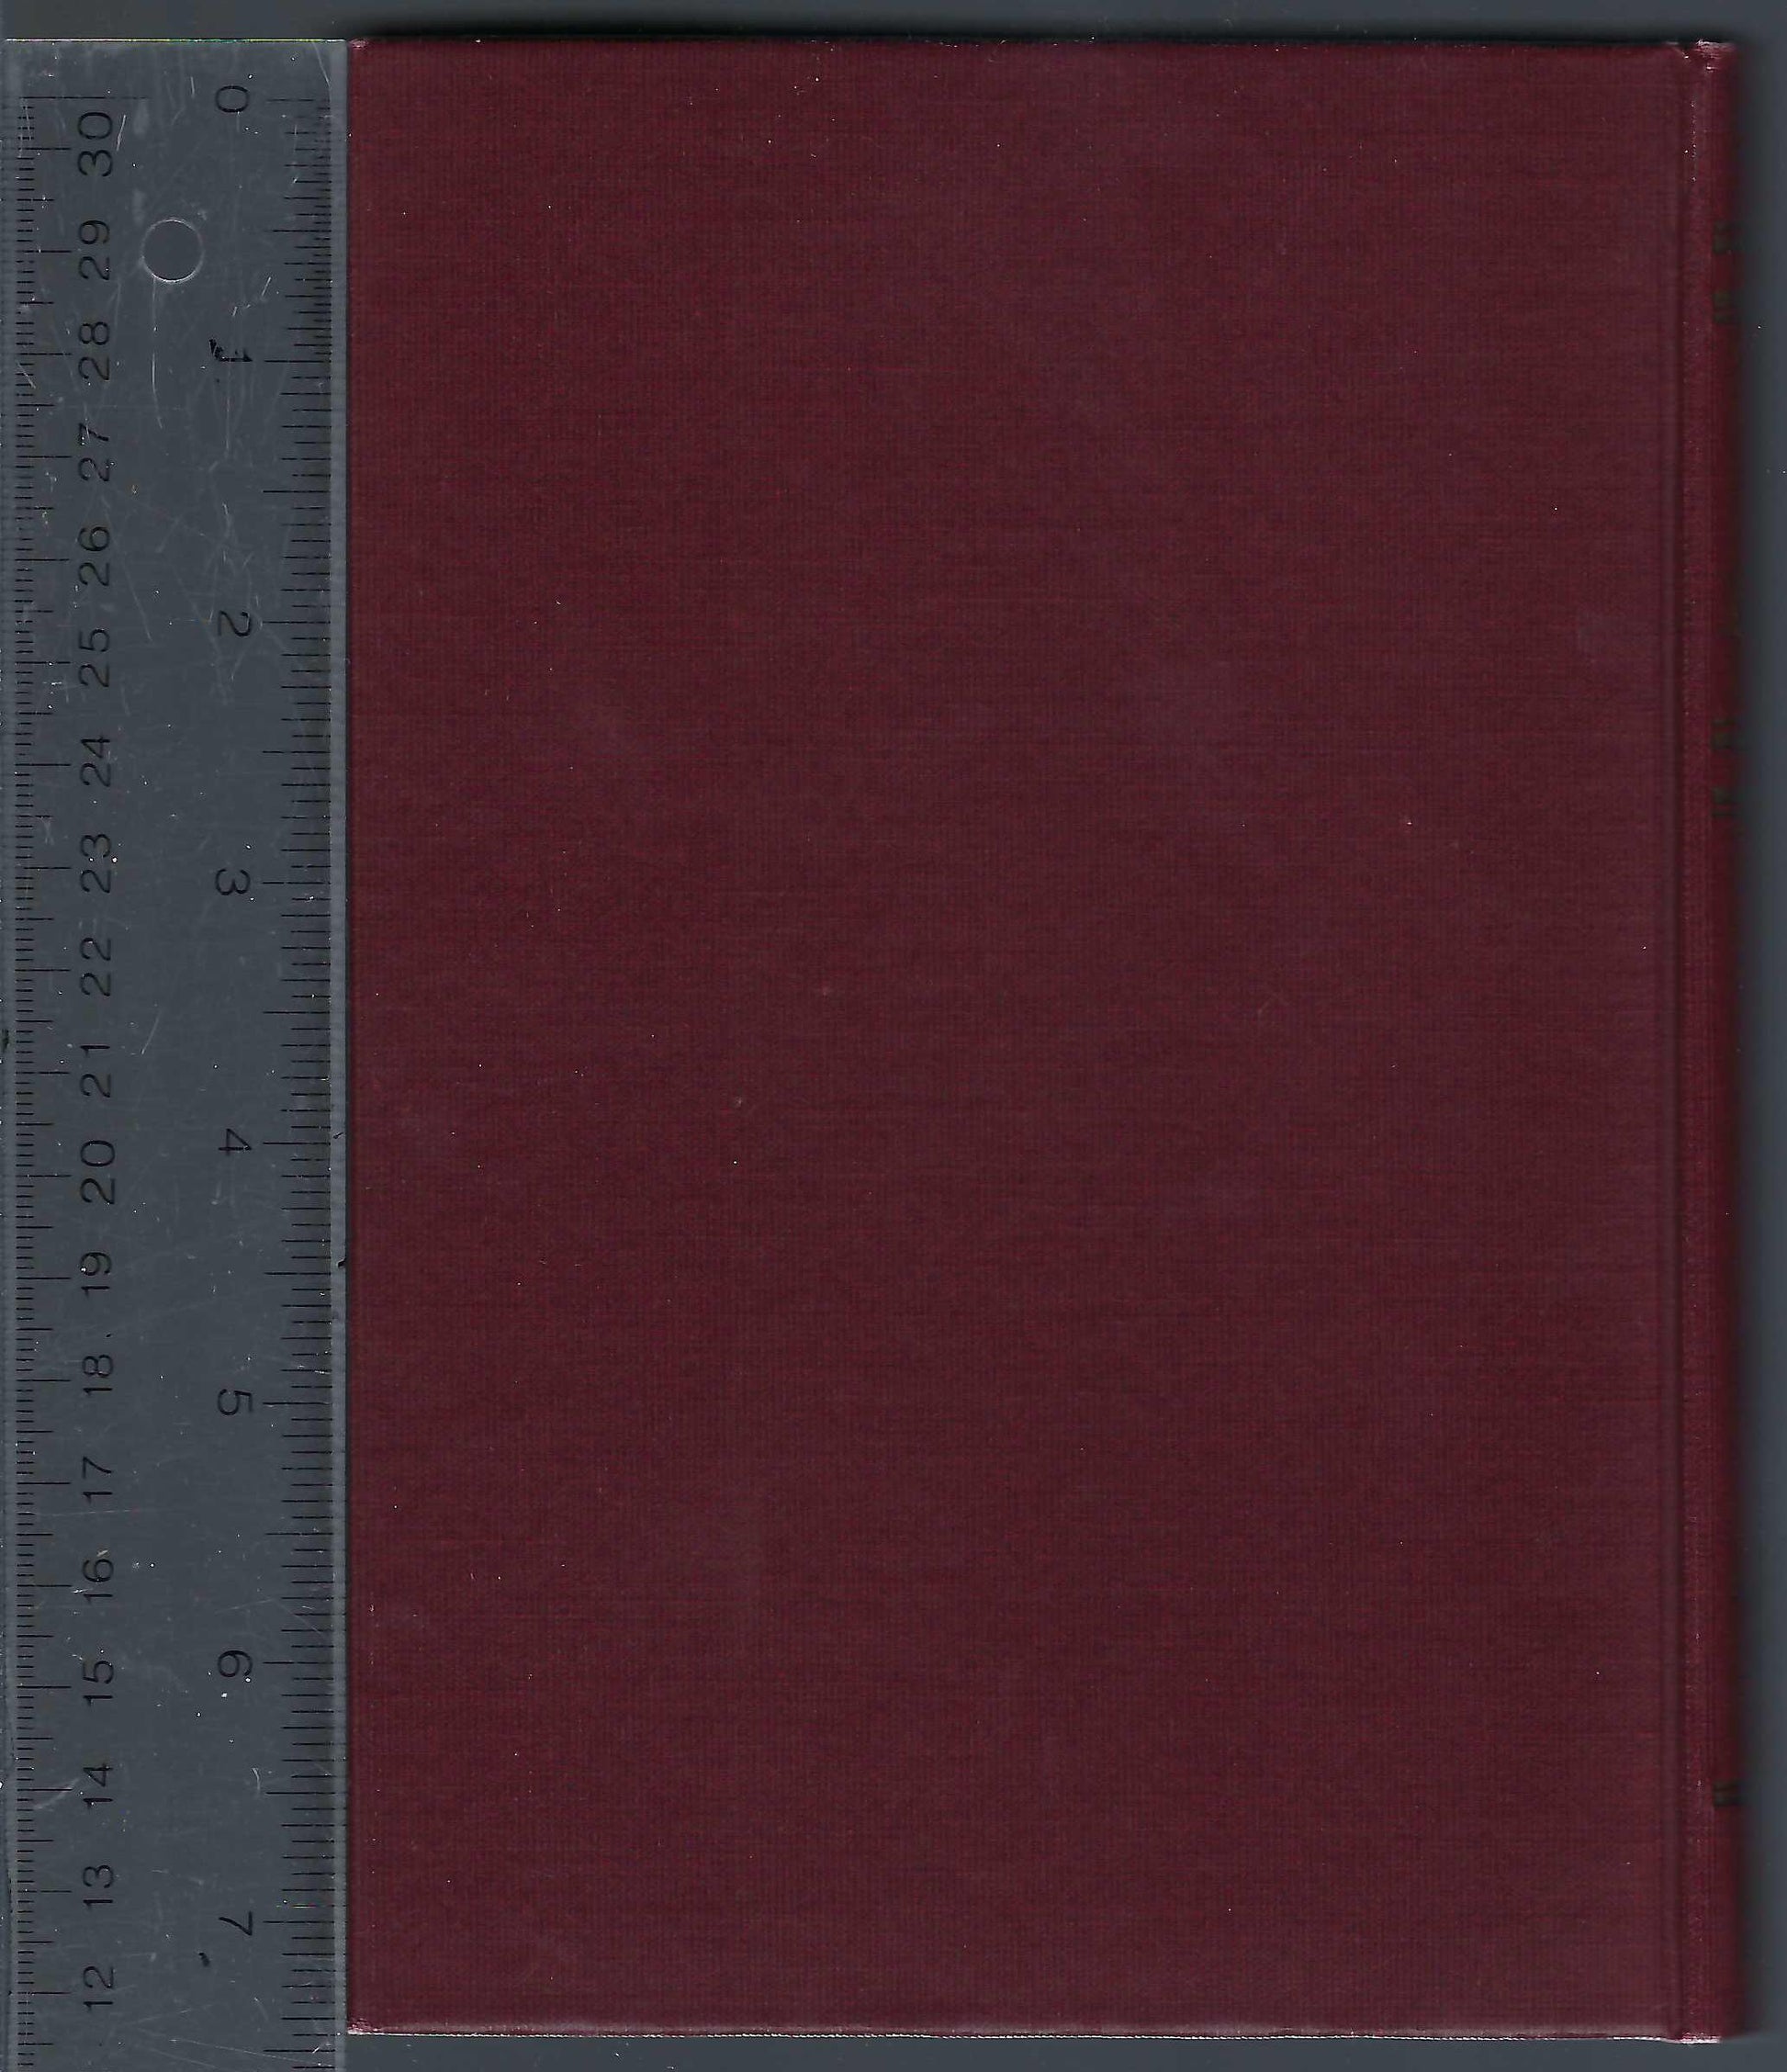 The Four Million rear cover